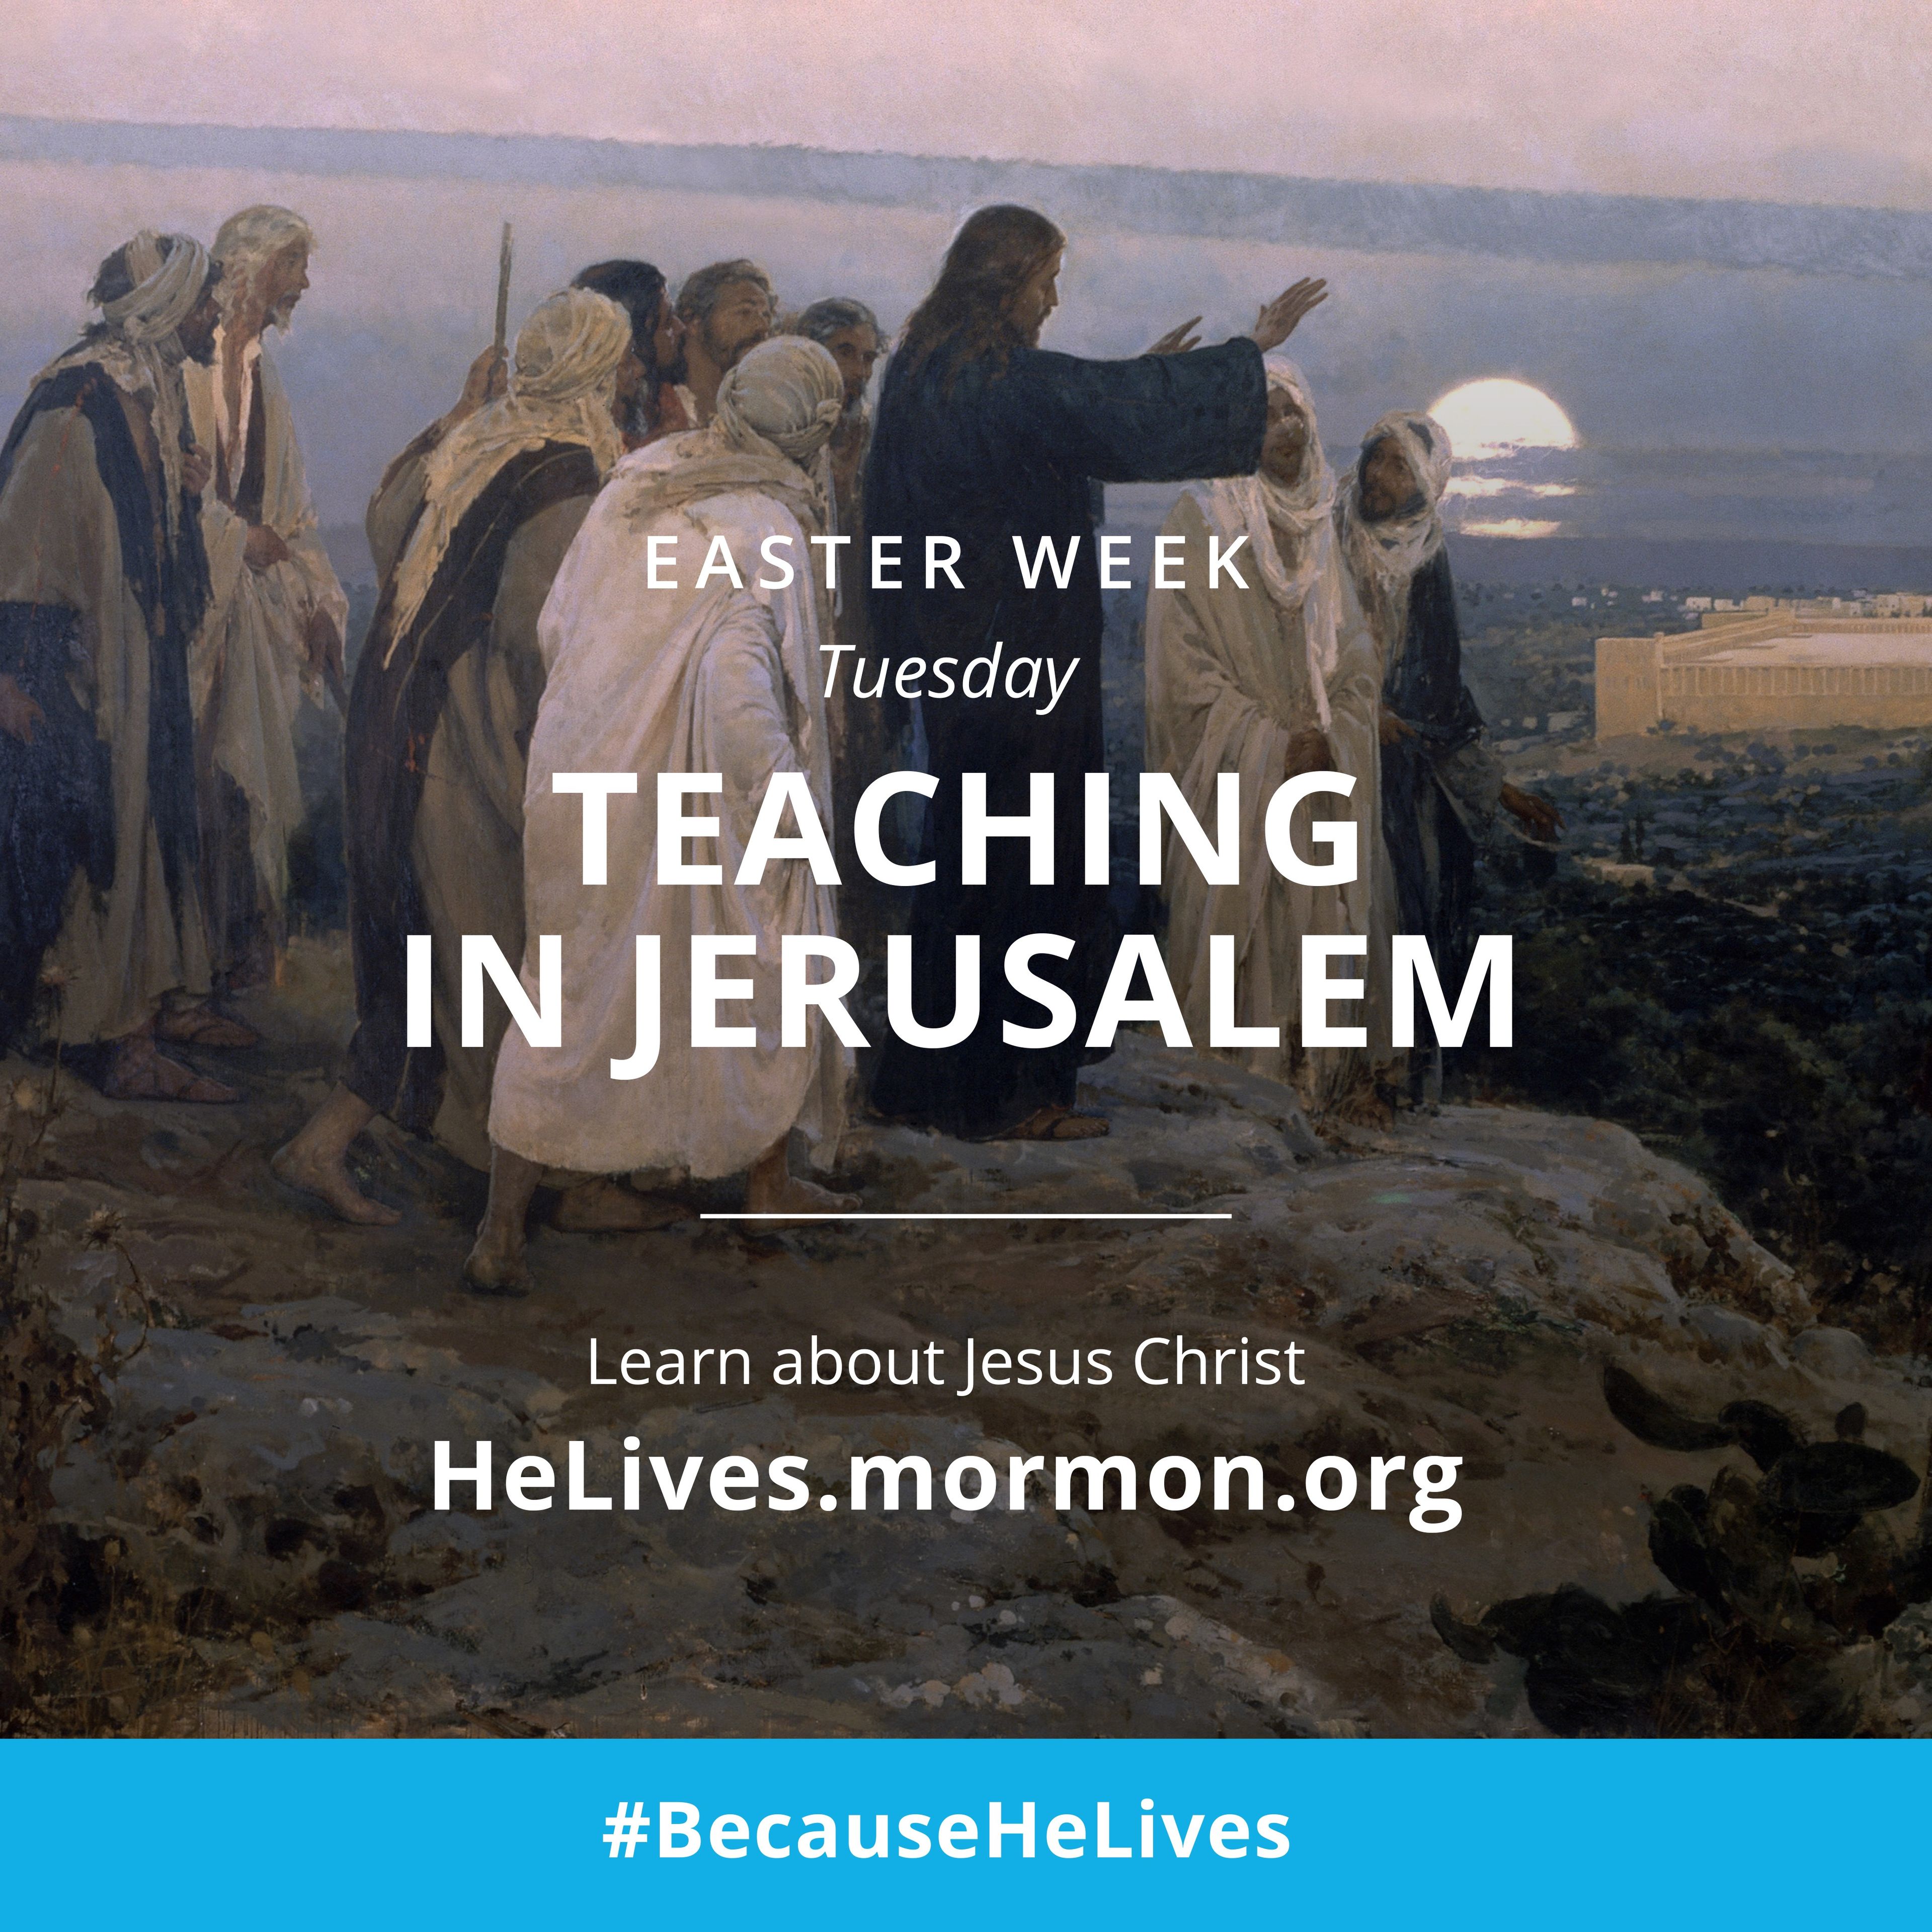 Easter week, Tuesday: teaching in Jerusalem. Learn about Jesus Christ. #BecauseHeLives, HeLives.mormon.org